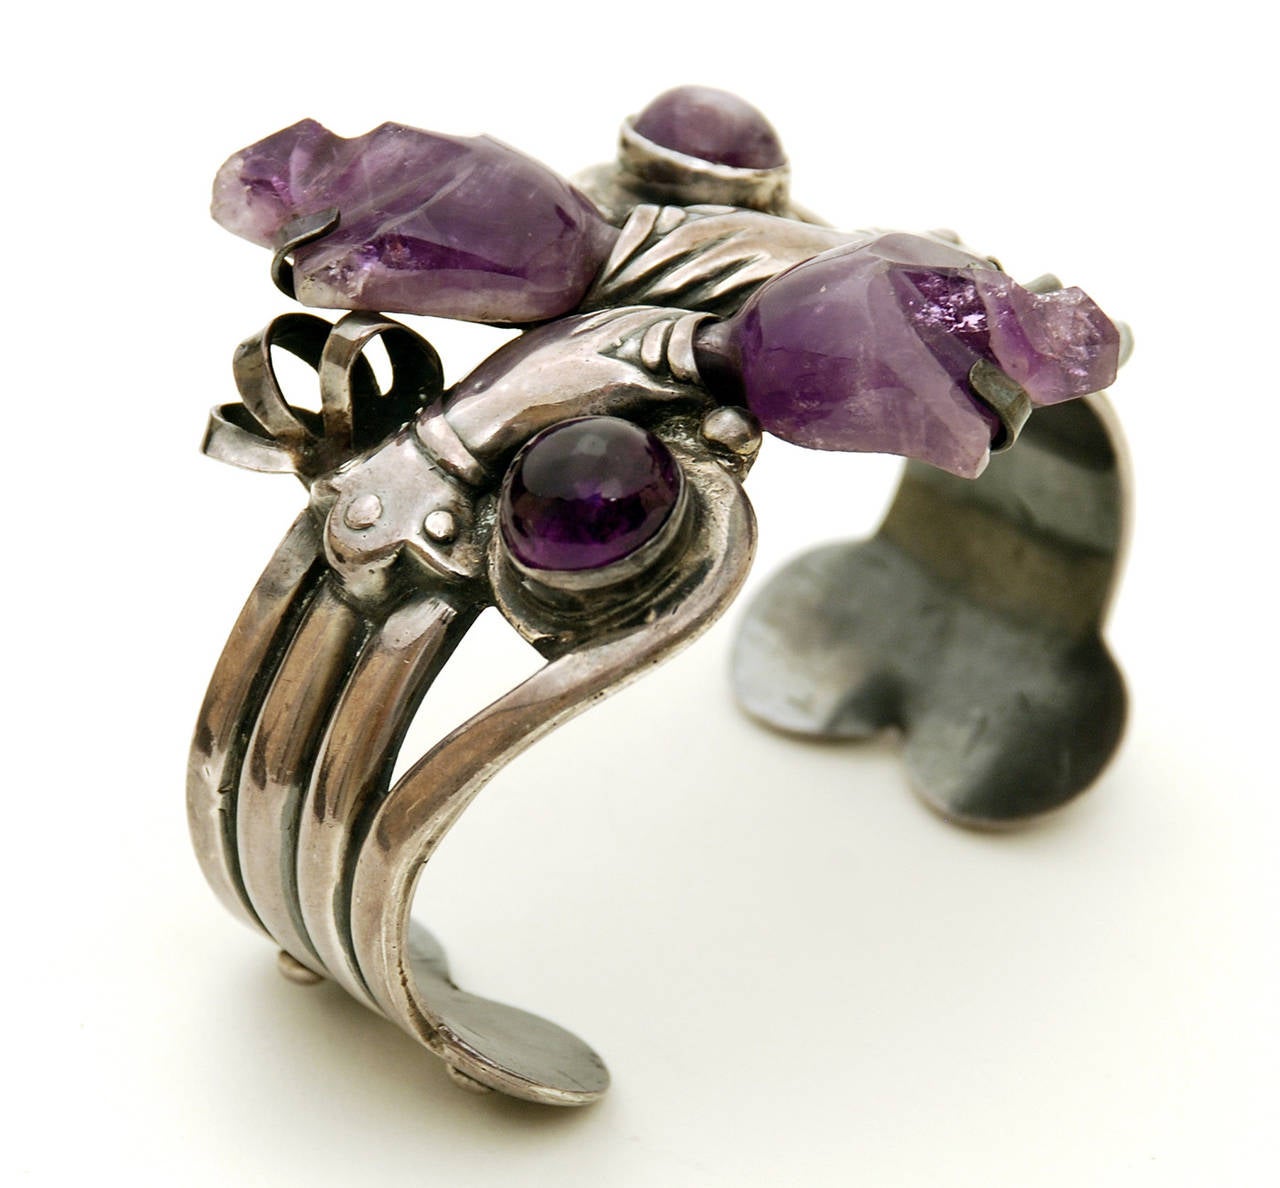 Vintage Mexican Silver and Amethyst Cuff Bracelet, circa 1940s For Sale 2